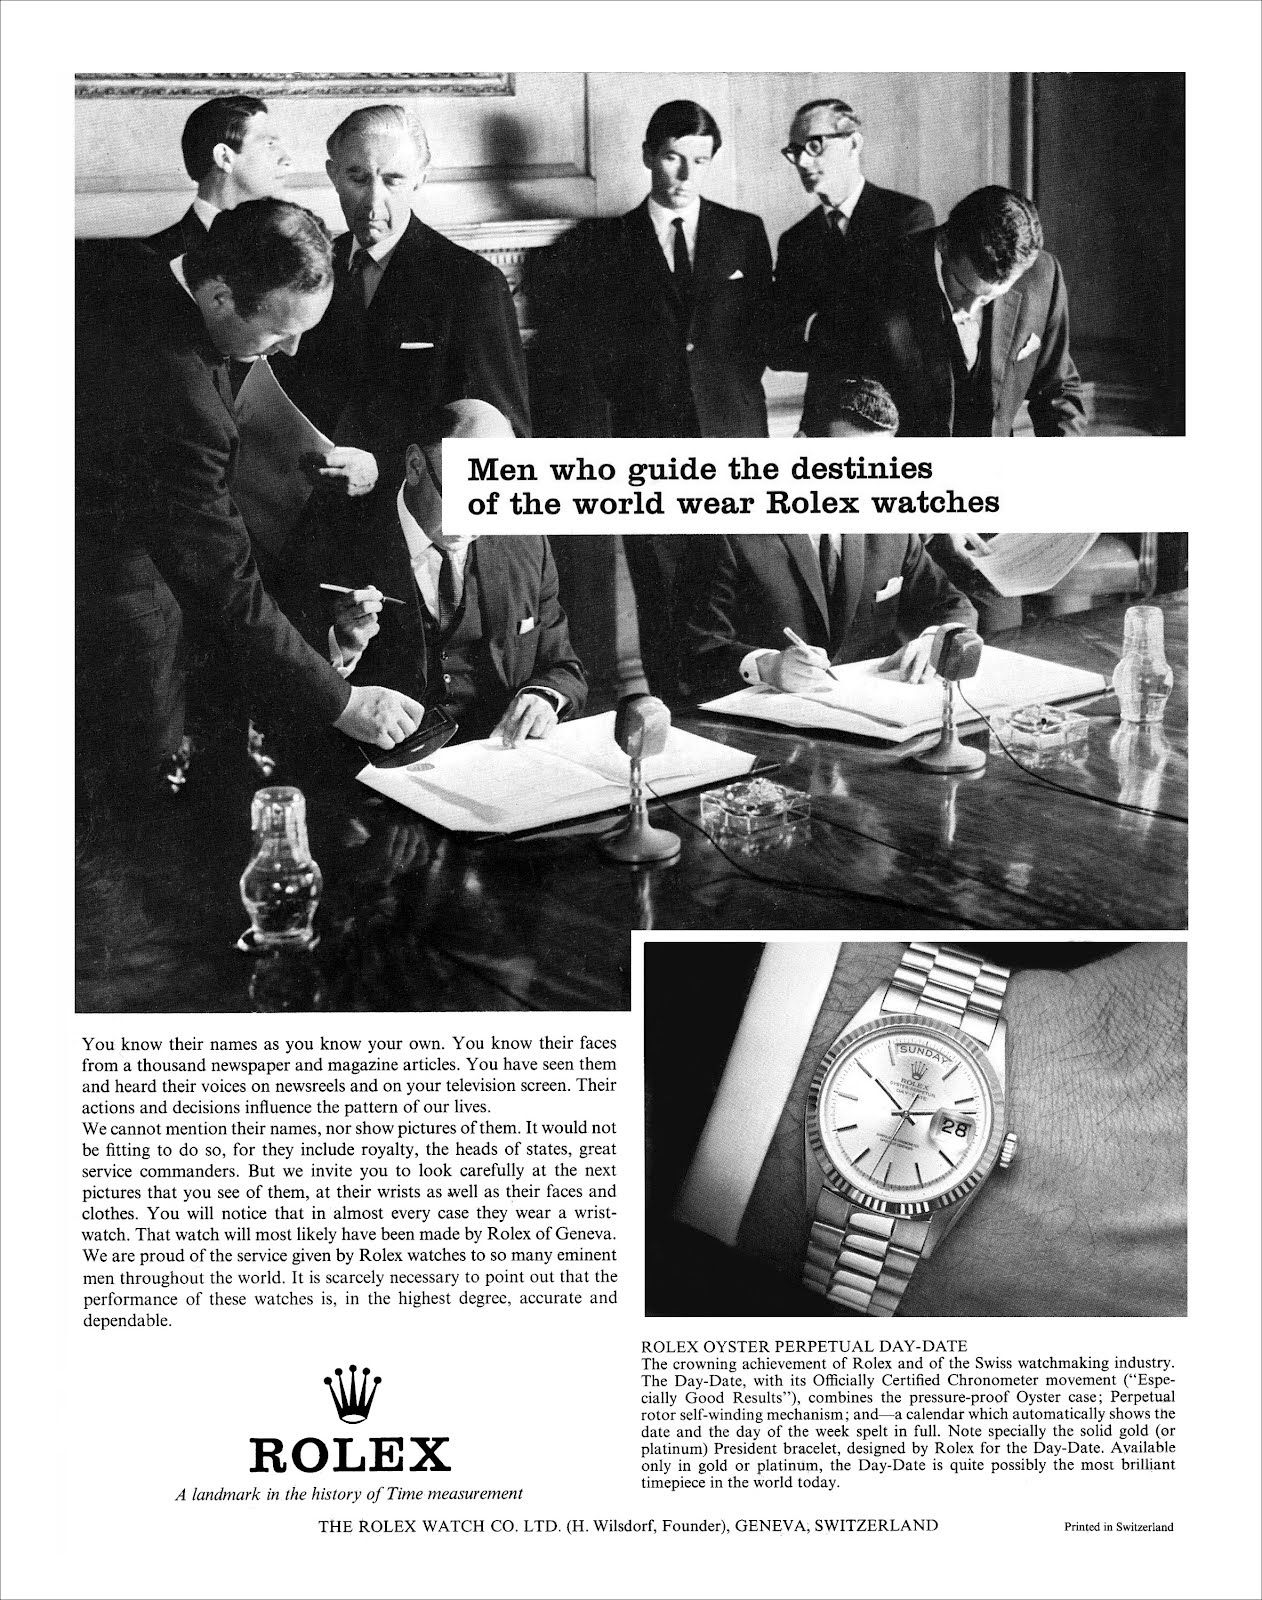 rolex day date model history